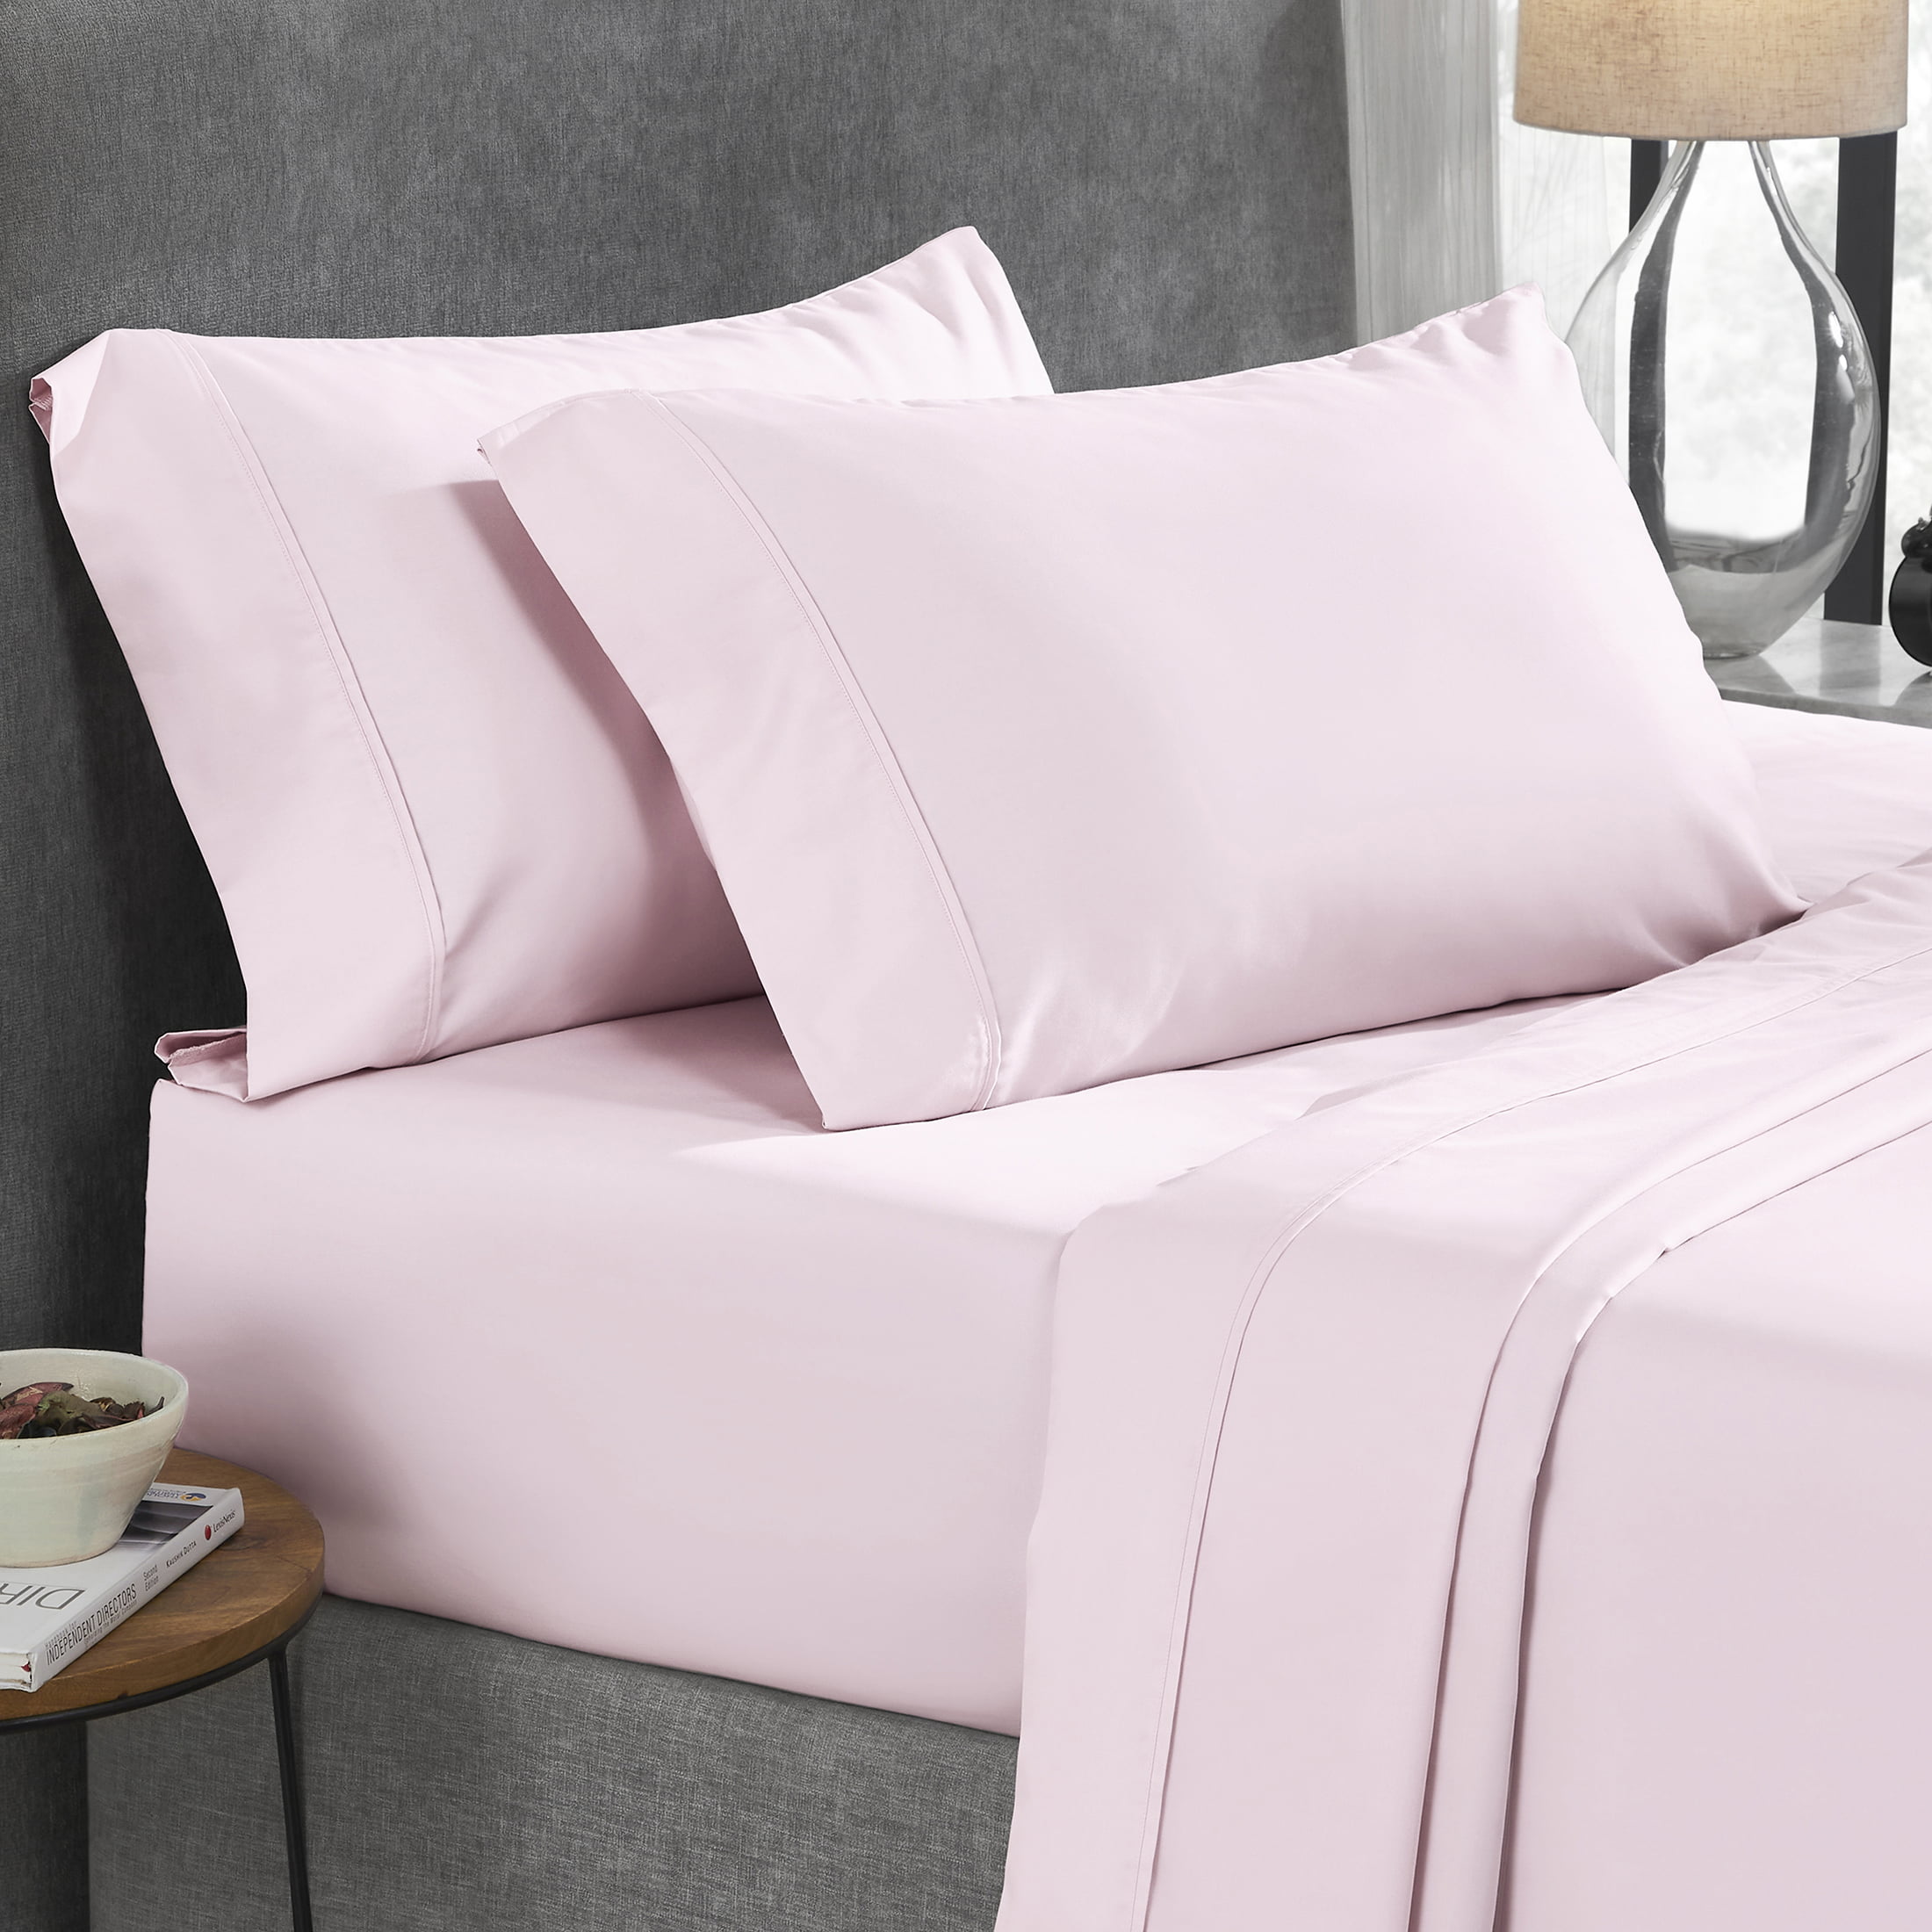 Details about   12 NEW pillow case cover std 20x30 white series T200 percale hotel linen premium 